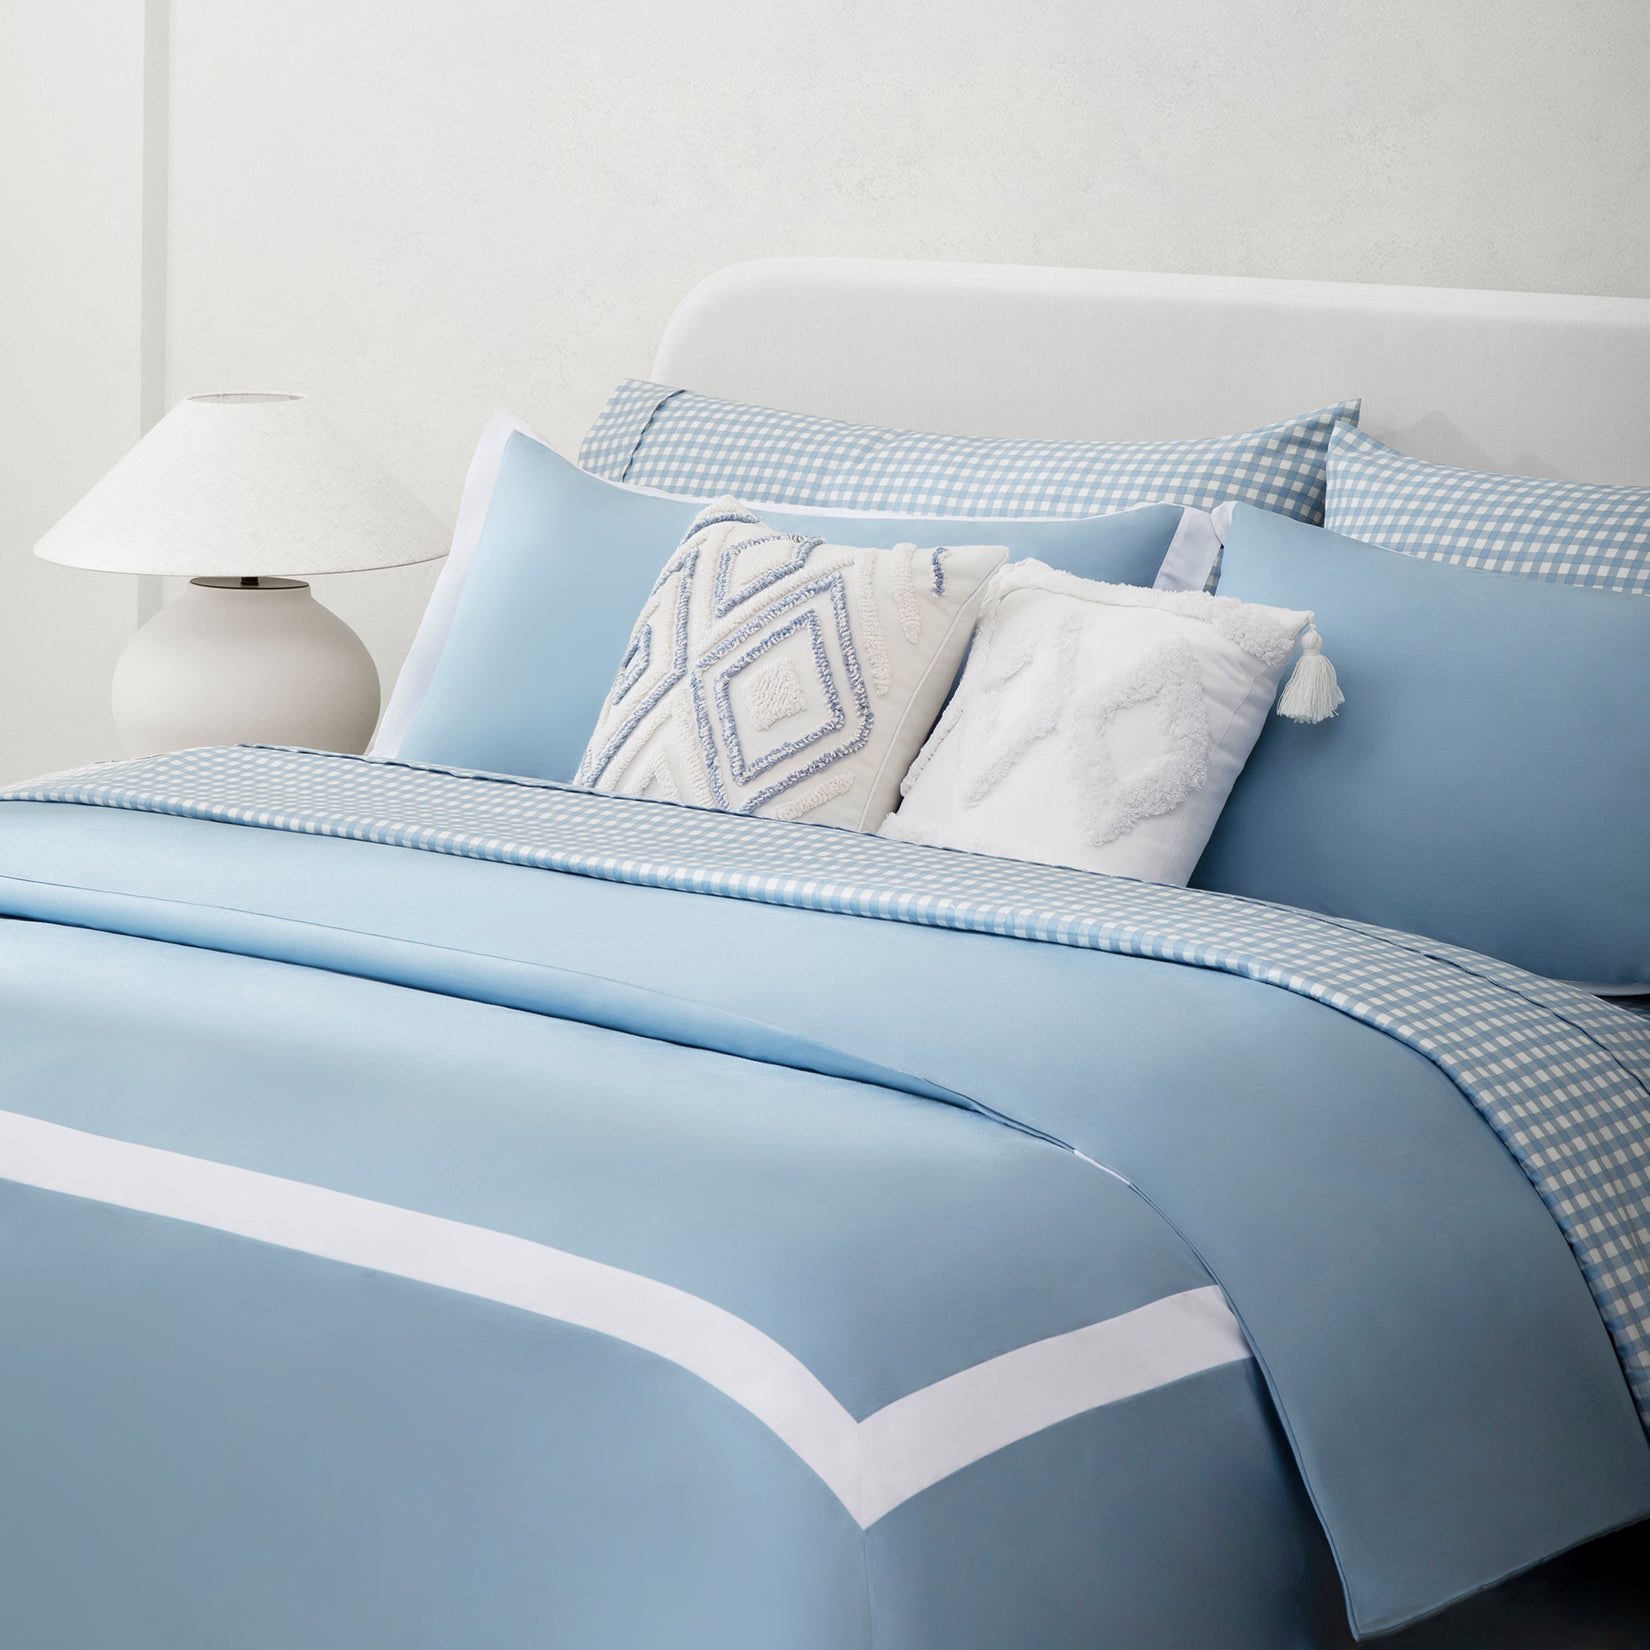 Paulina Sky Blue 200 thread count combed cotton duvet set. Sky blue and white pillows and duvet on sky blue gingham bed sheets with fluffy accent pillows next to side table and lamp.